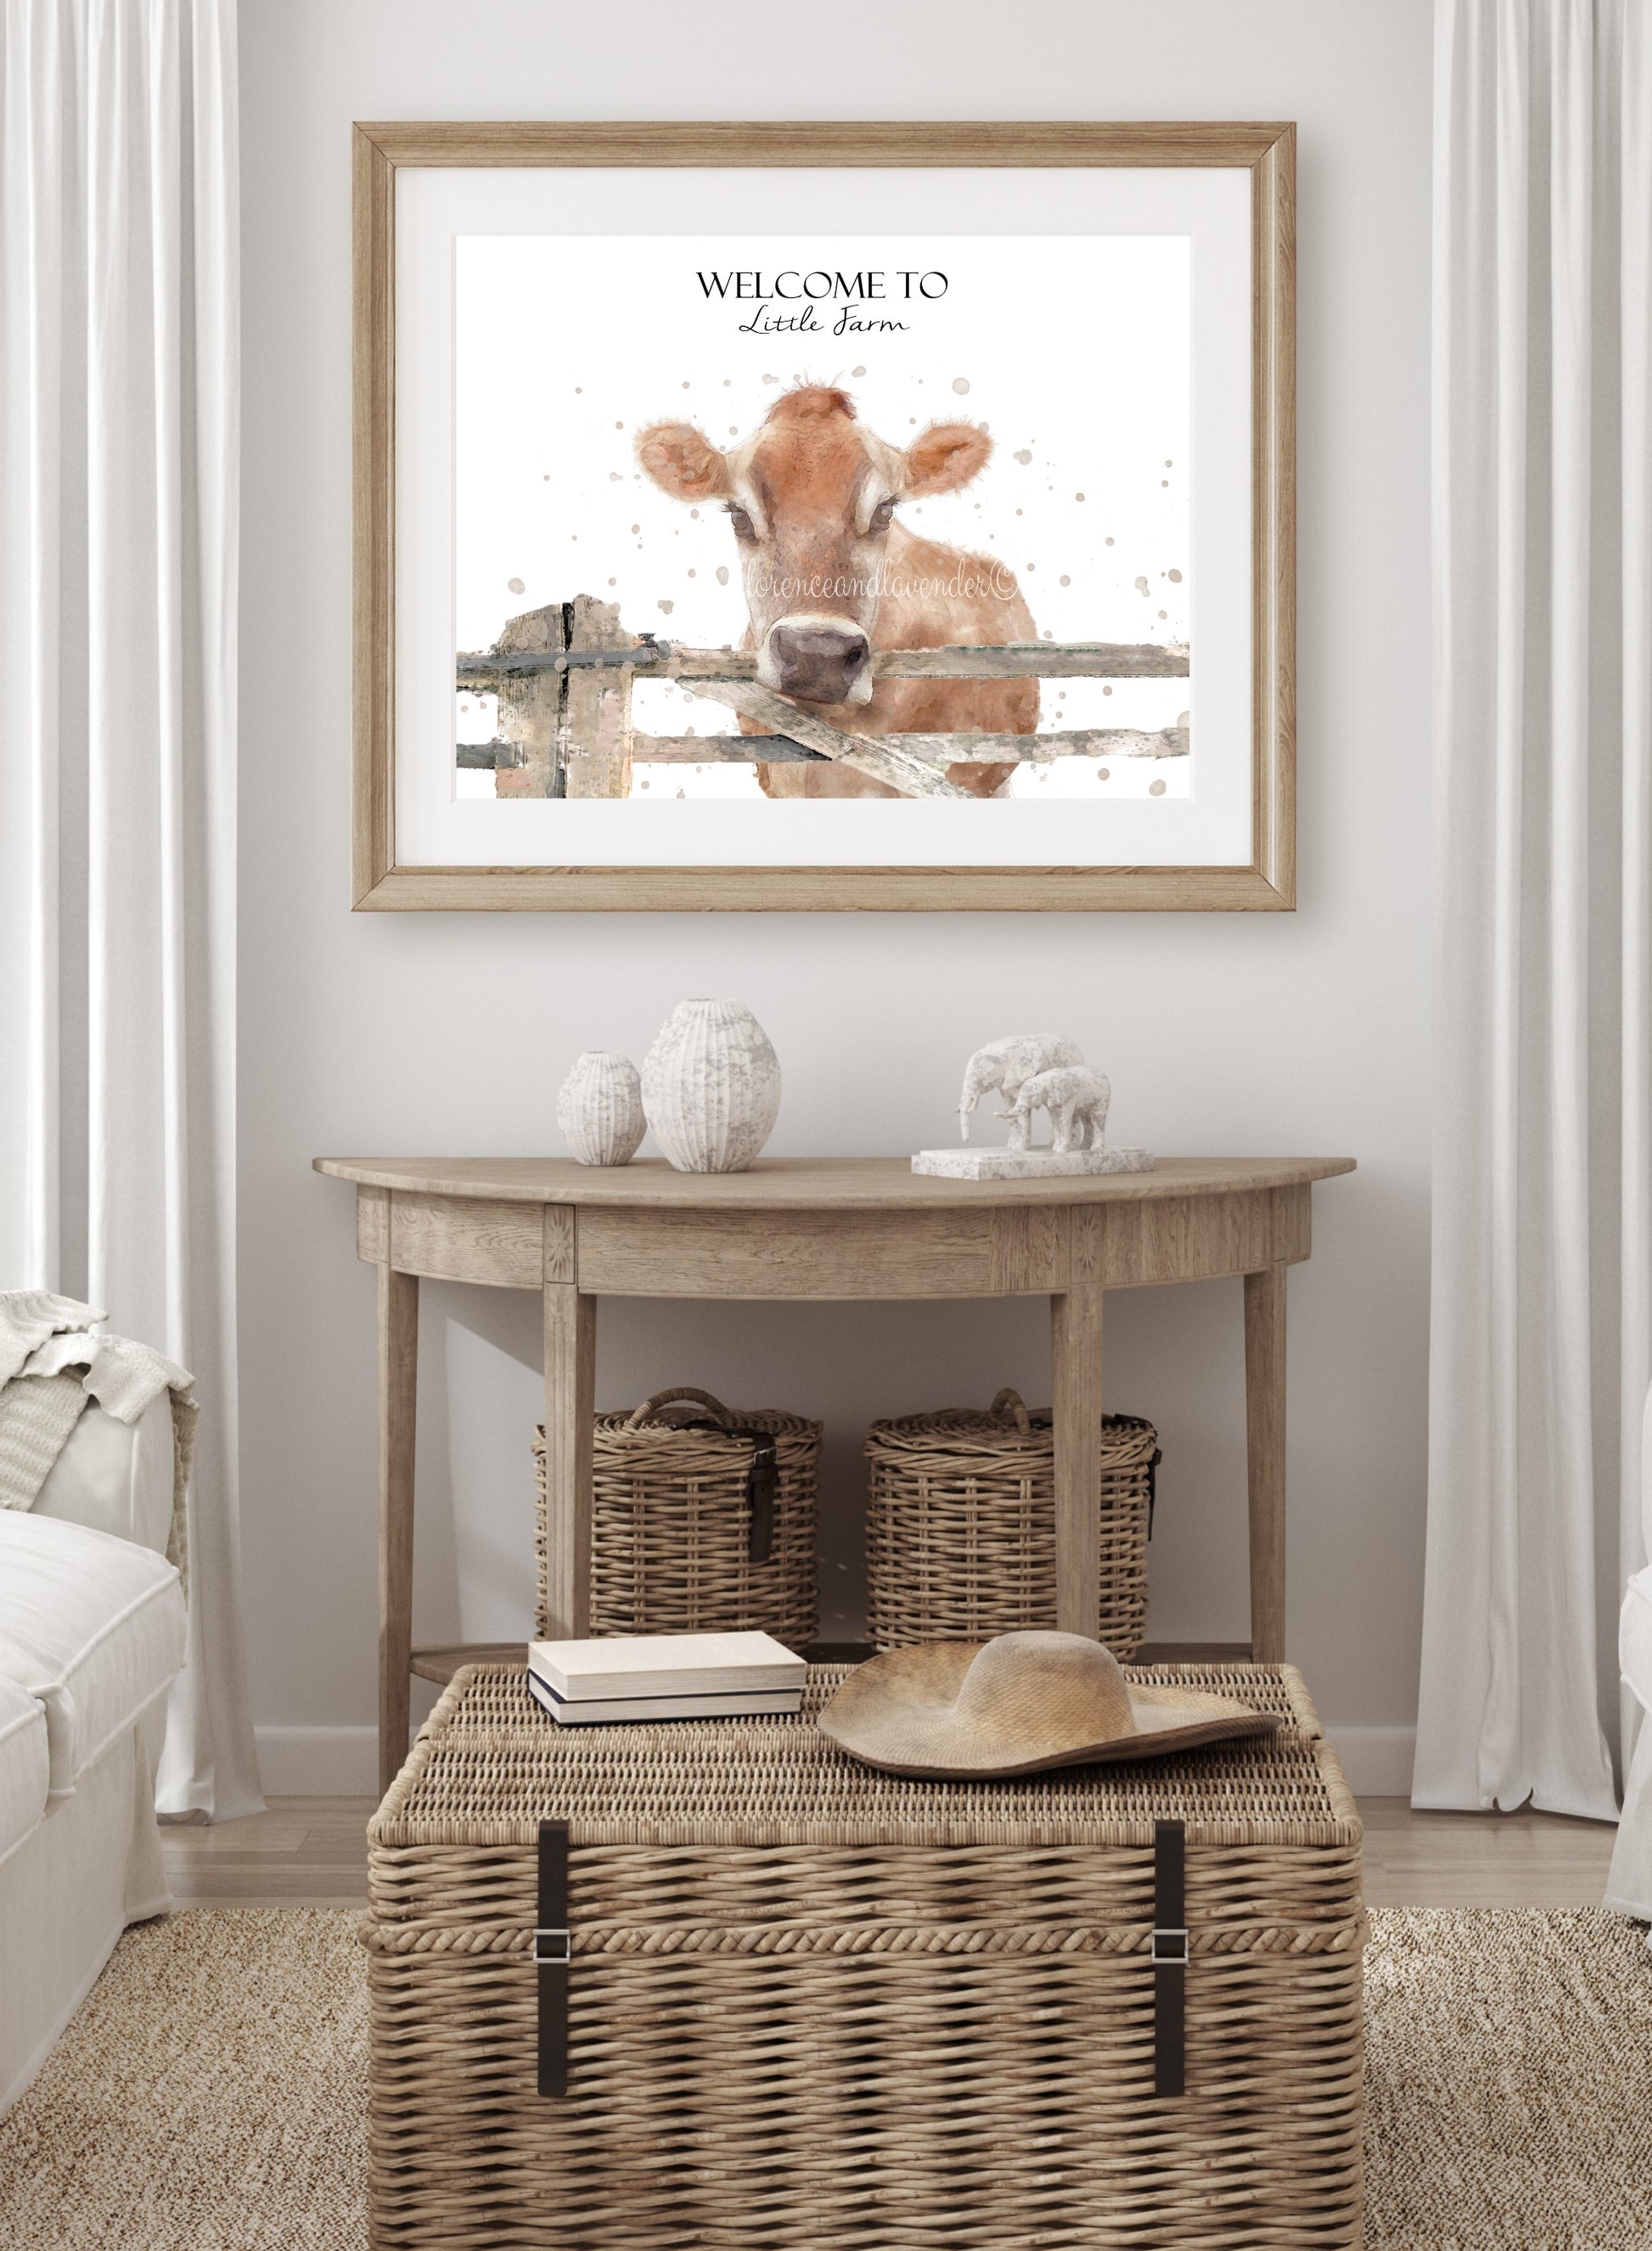 Personalised Jersey Cow Print - Florence & Lavender